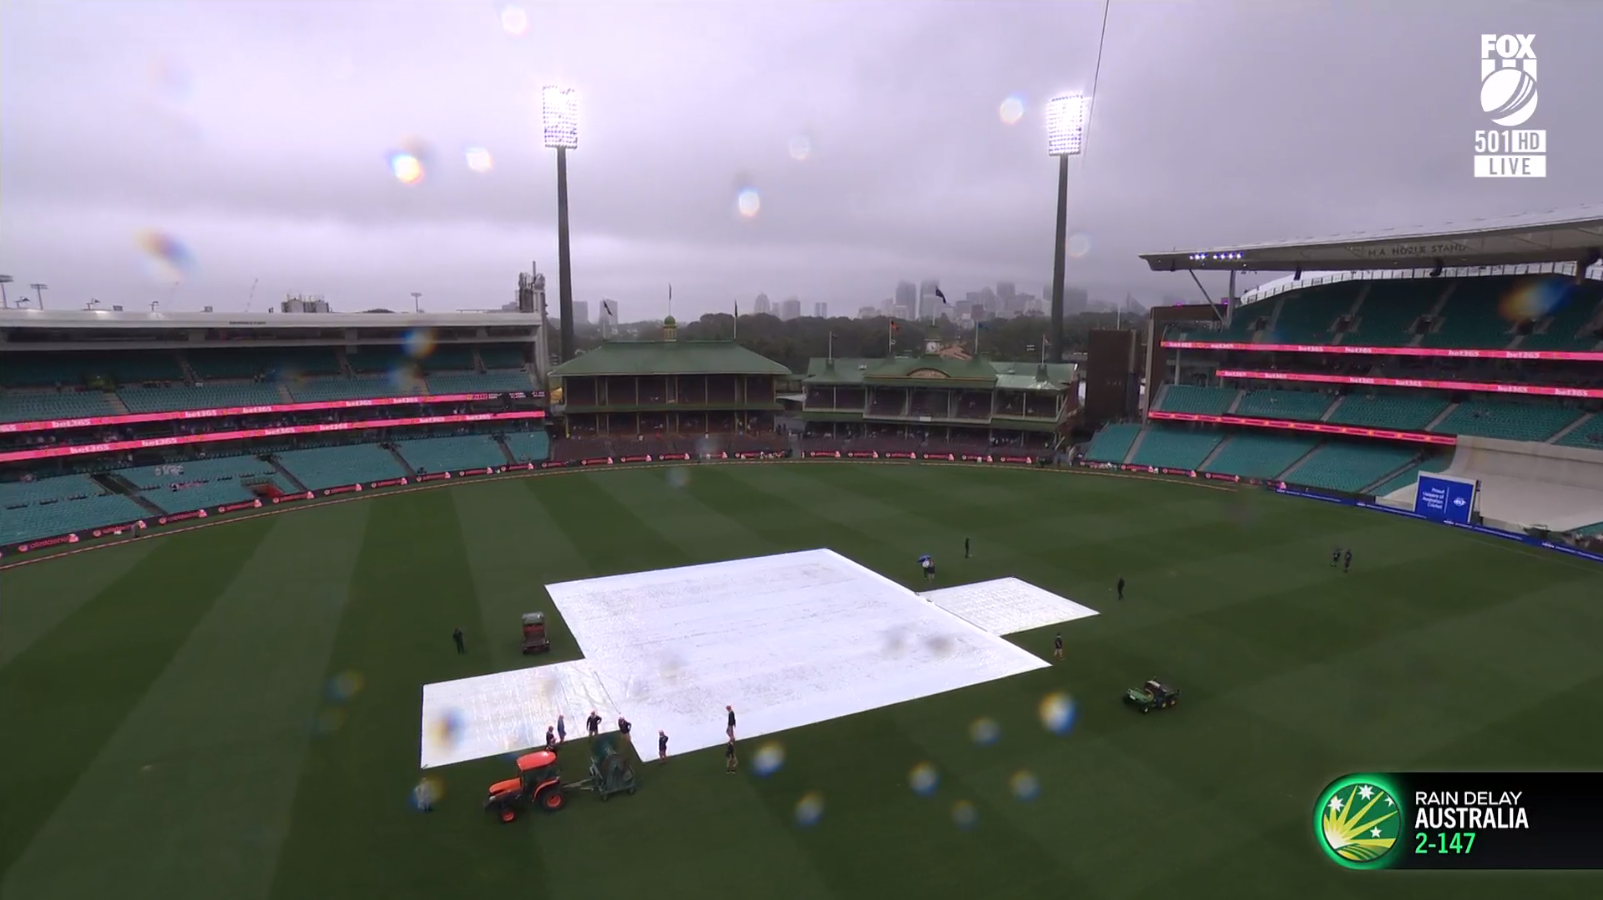 Rain on the camera lens in this screenshot from Fox Sports showing covers on the pitch at the SCG during a cricket Test.